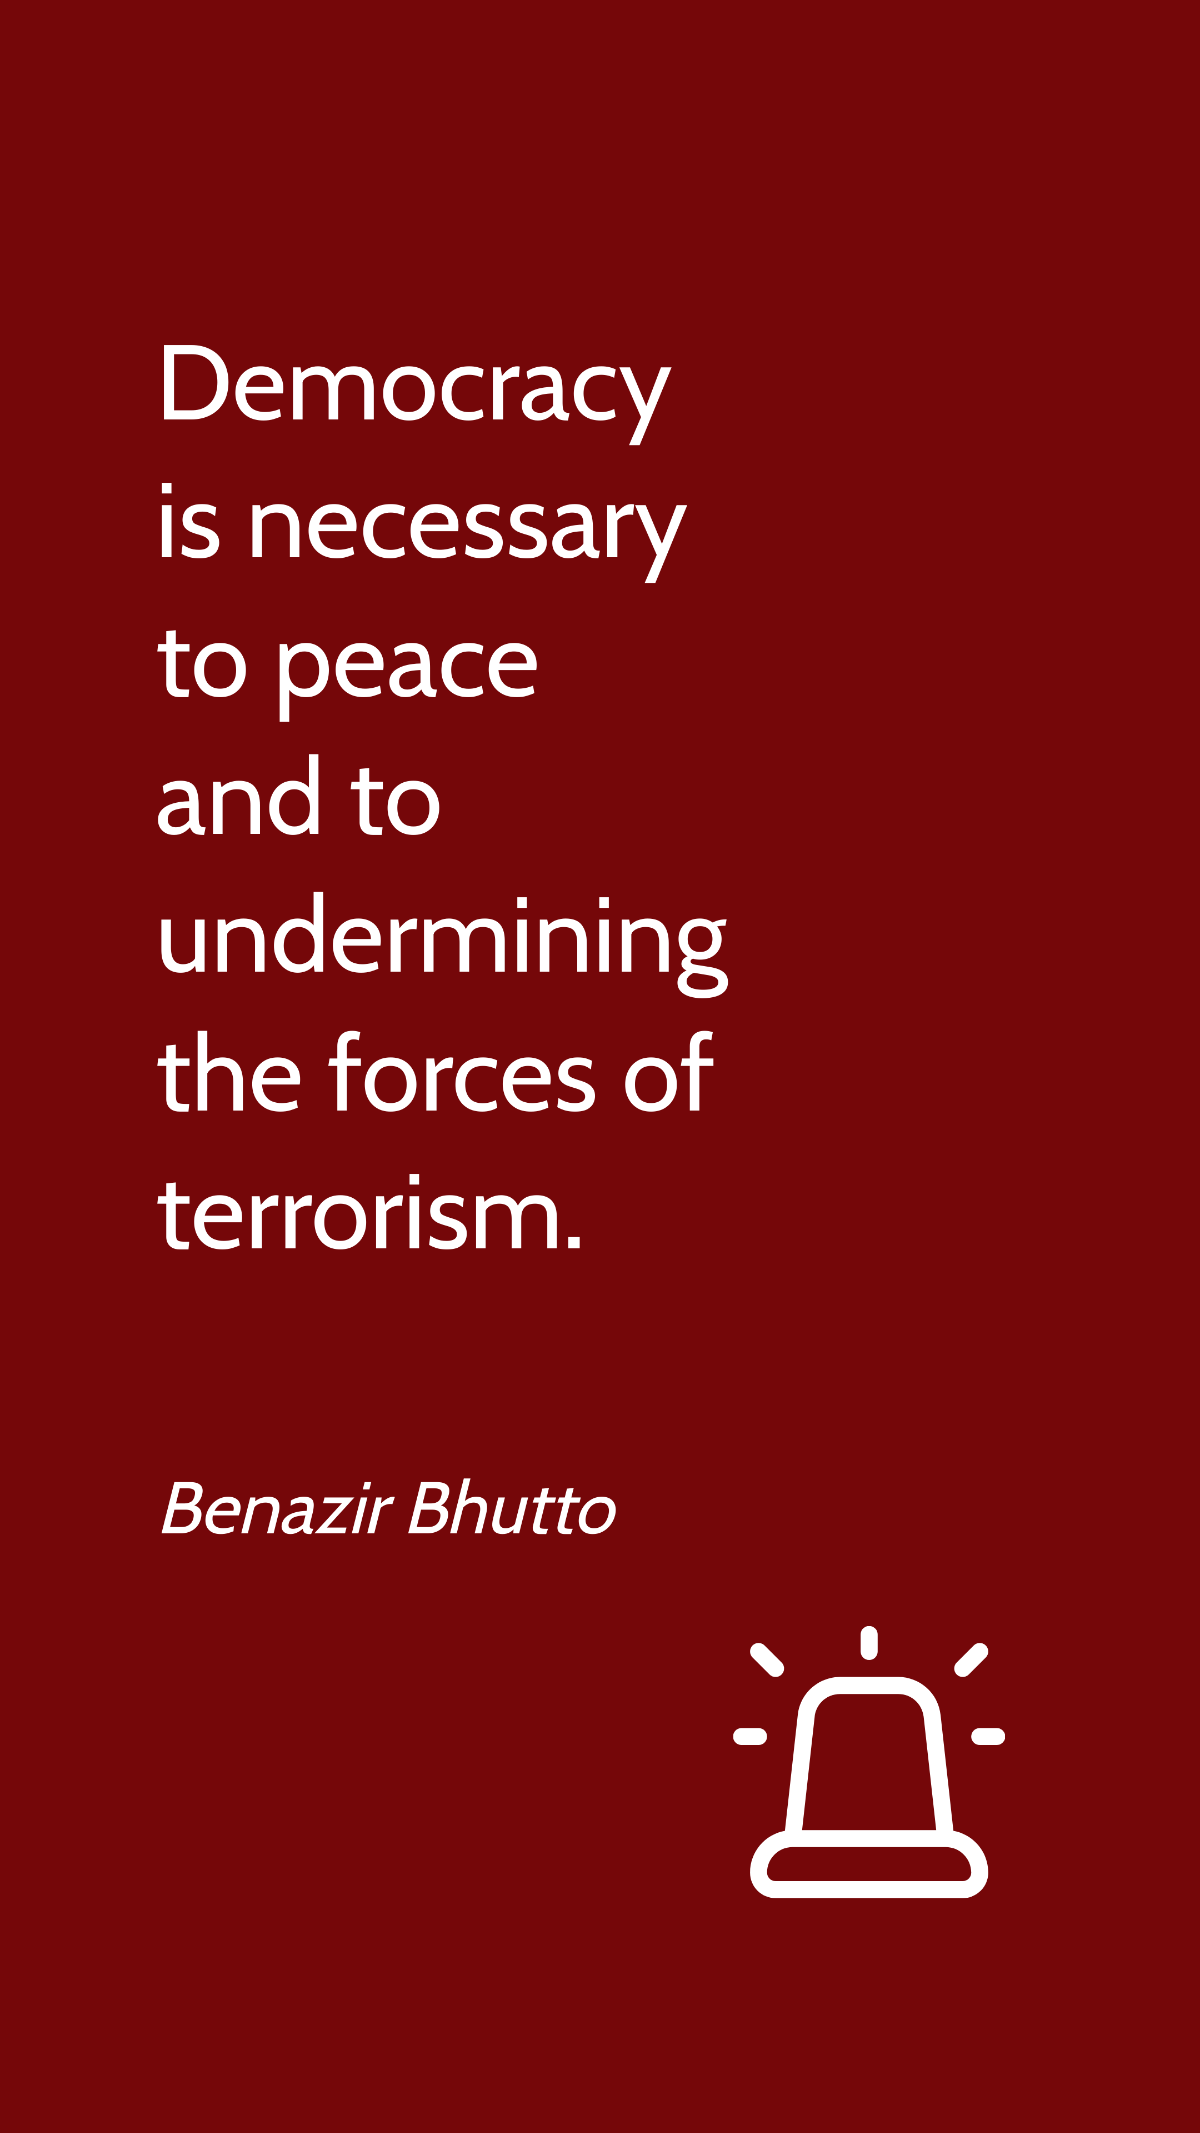 Benazir Bhutto - Democracy is necessary to peace and to undermining the forces of terrorism. Template